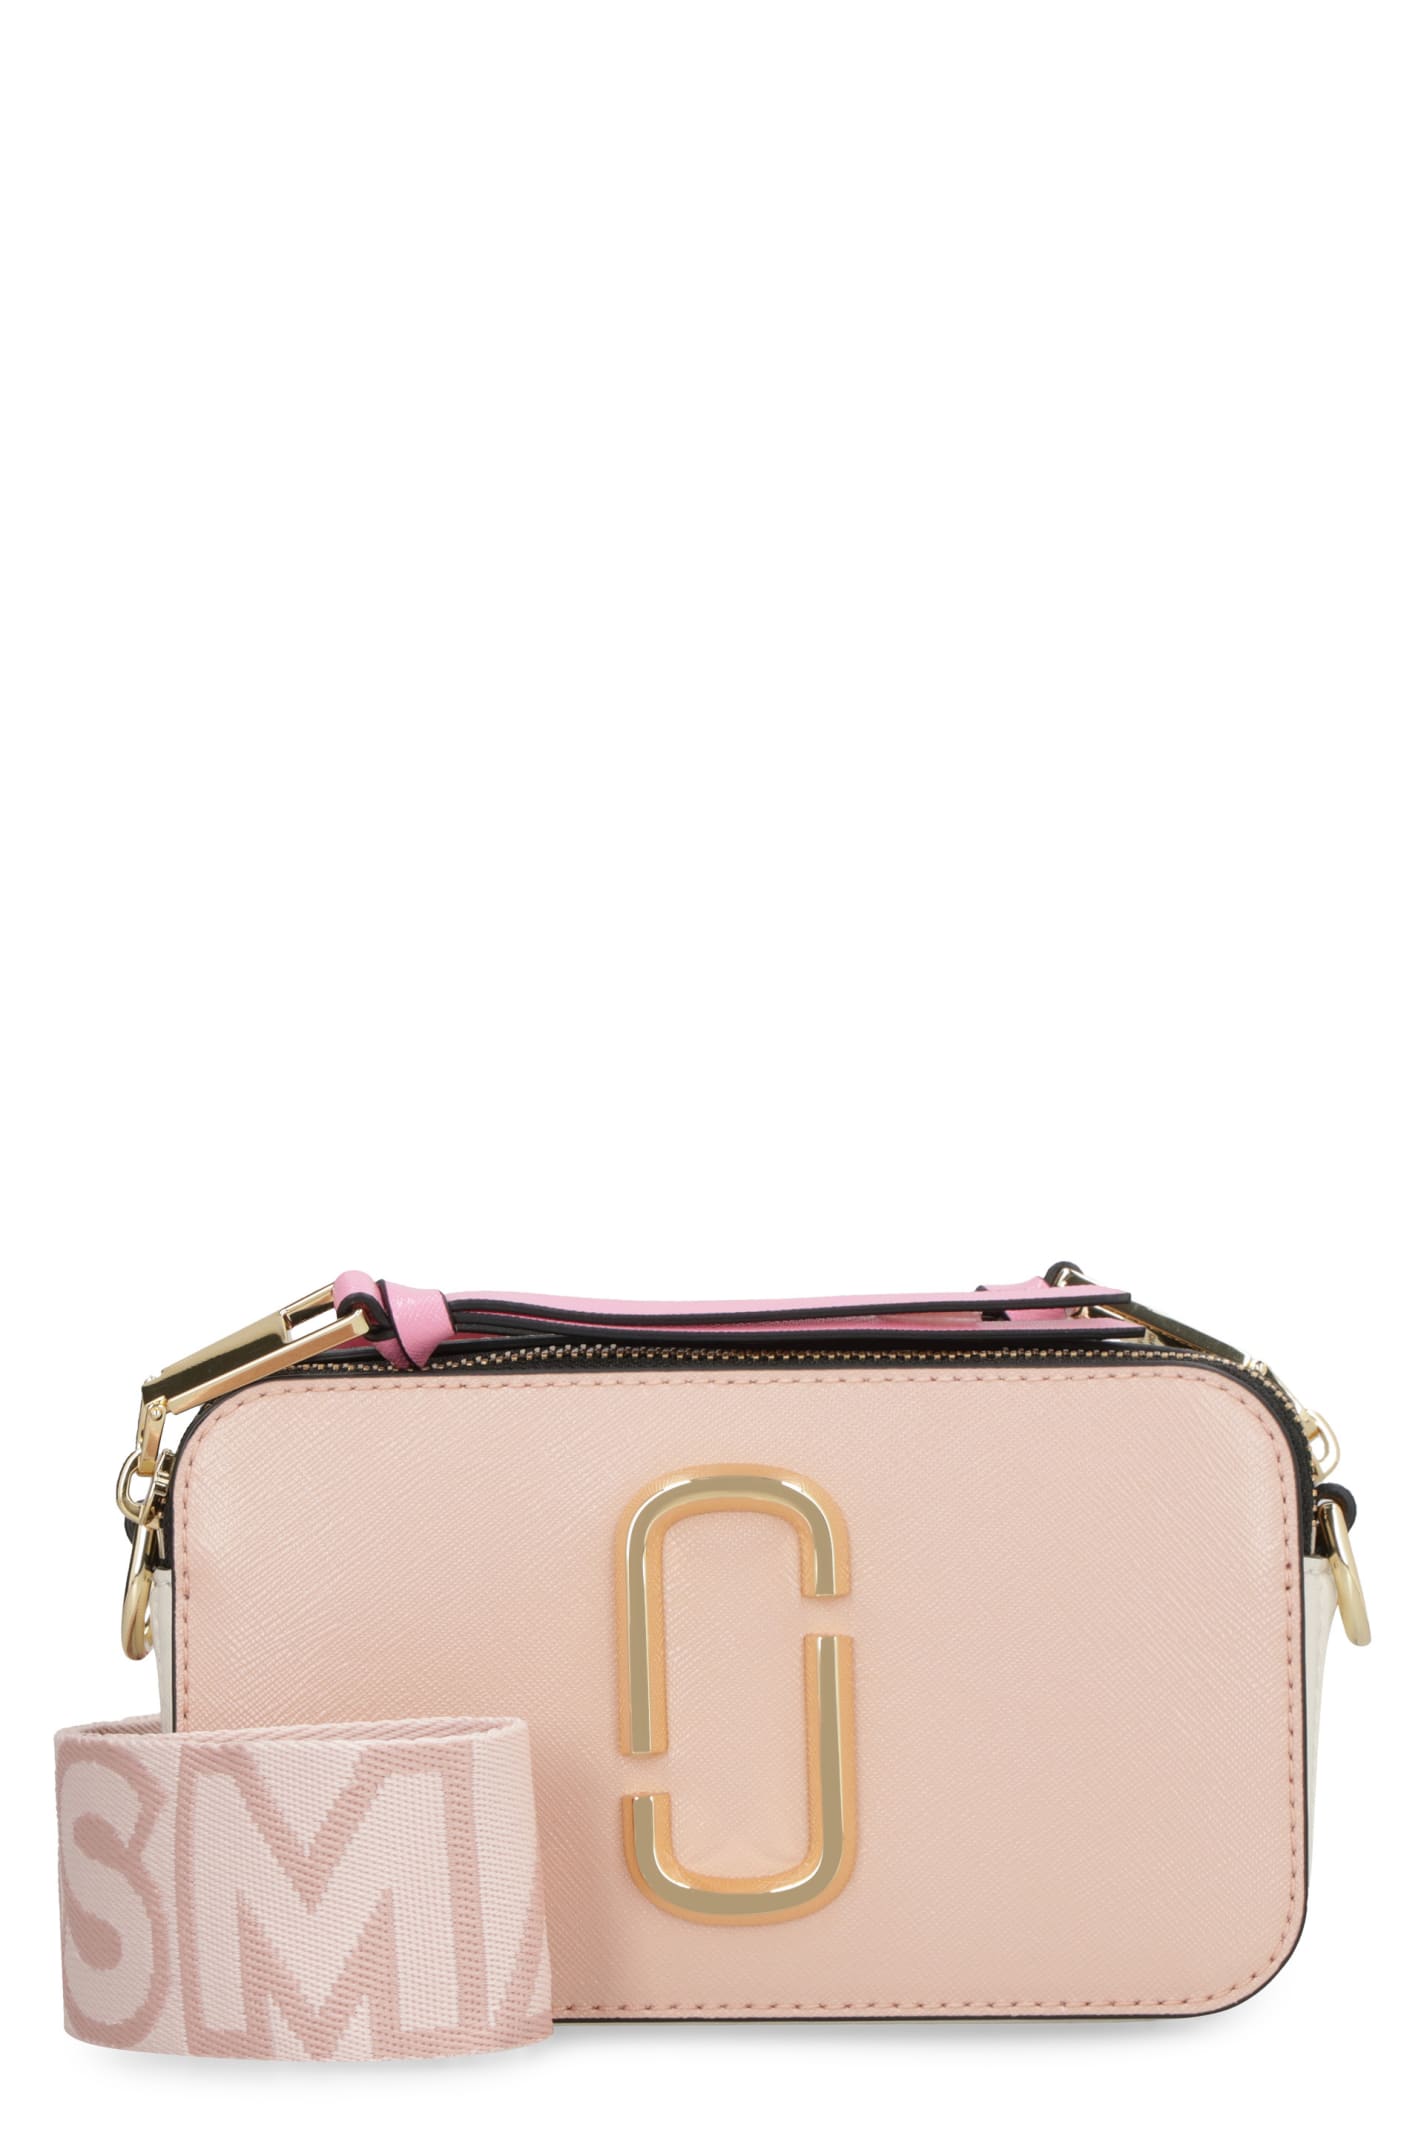 MARC JACOBS THE SNAPSHOT LEATHER CAMERA BAG